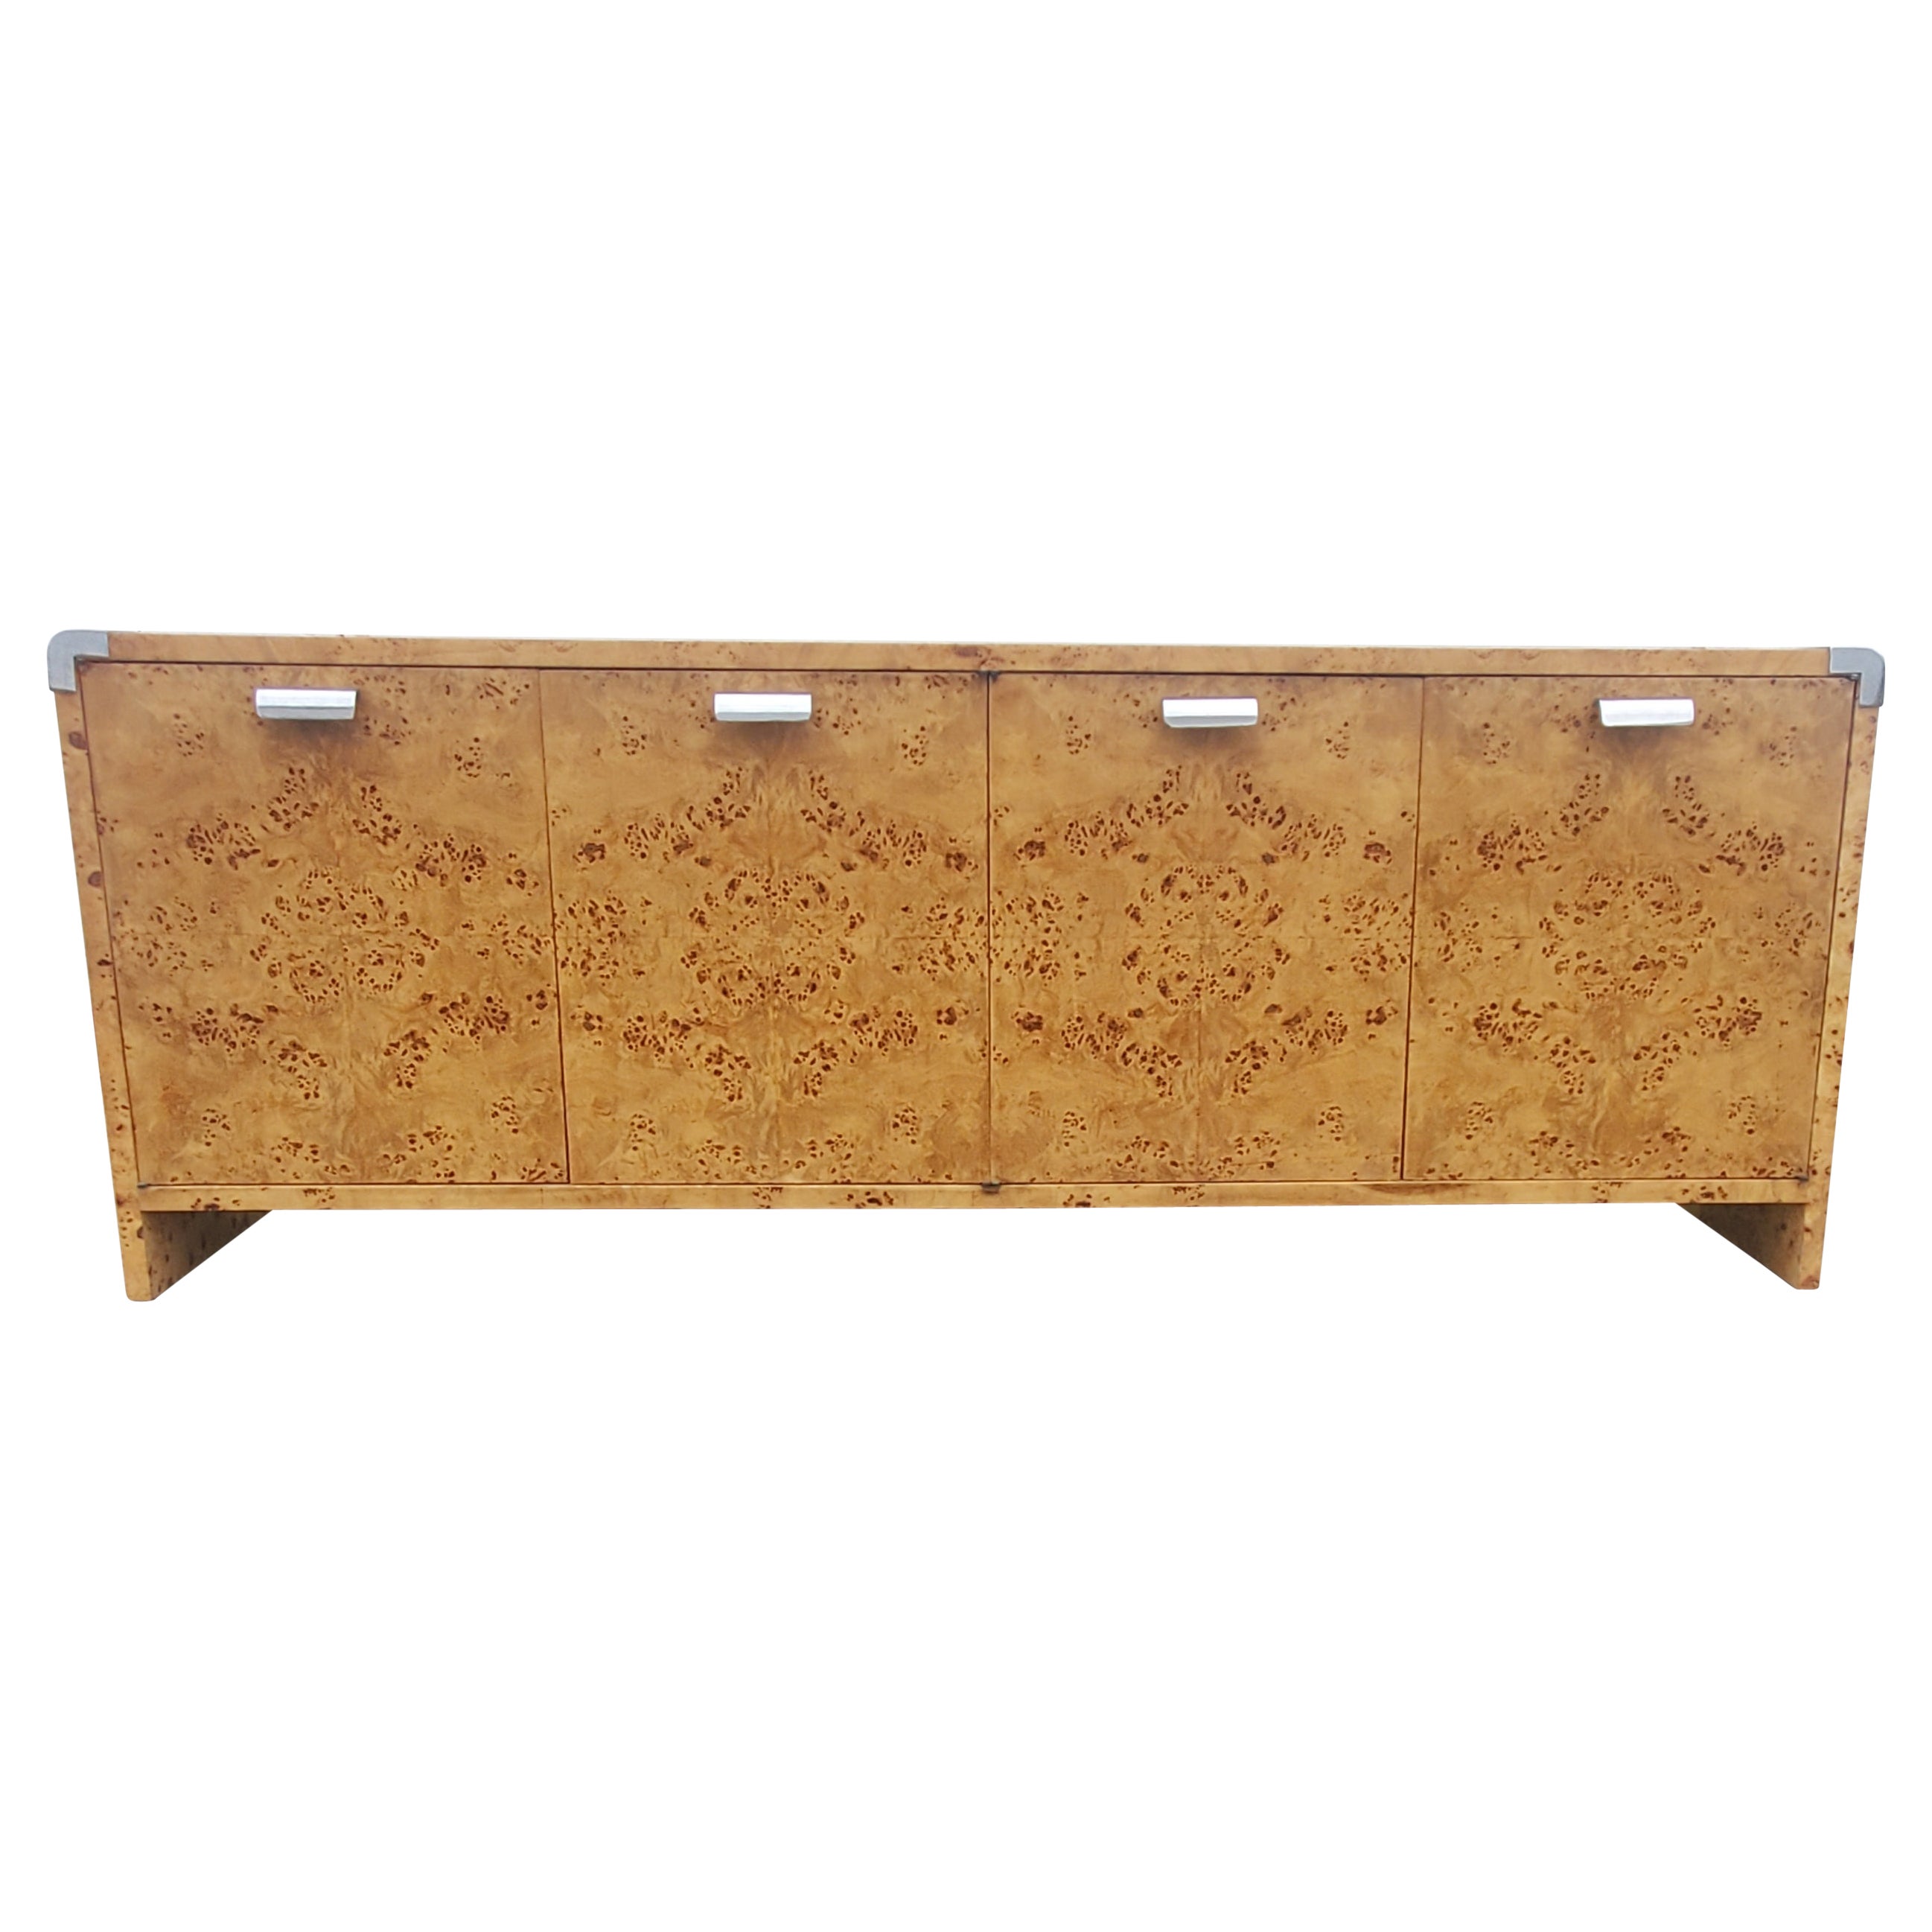 Leon Rosen Pace Collection Burl Wood Credenza